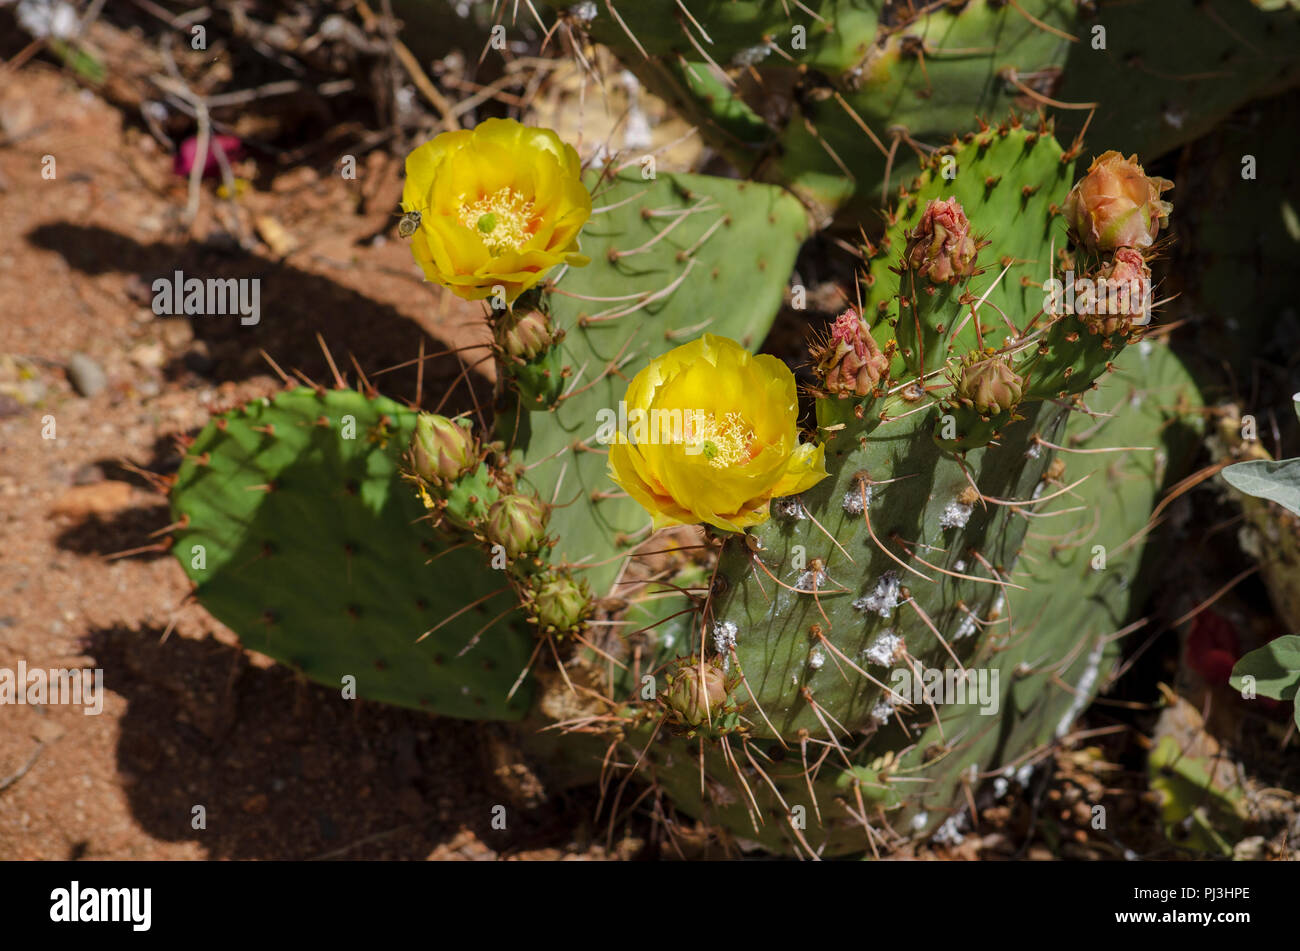 Yellow flowers on a Prickly pear cactus. Stock Photo